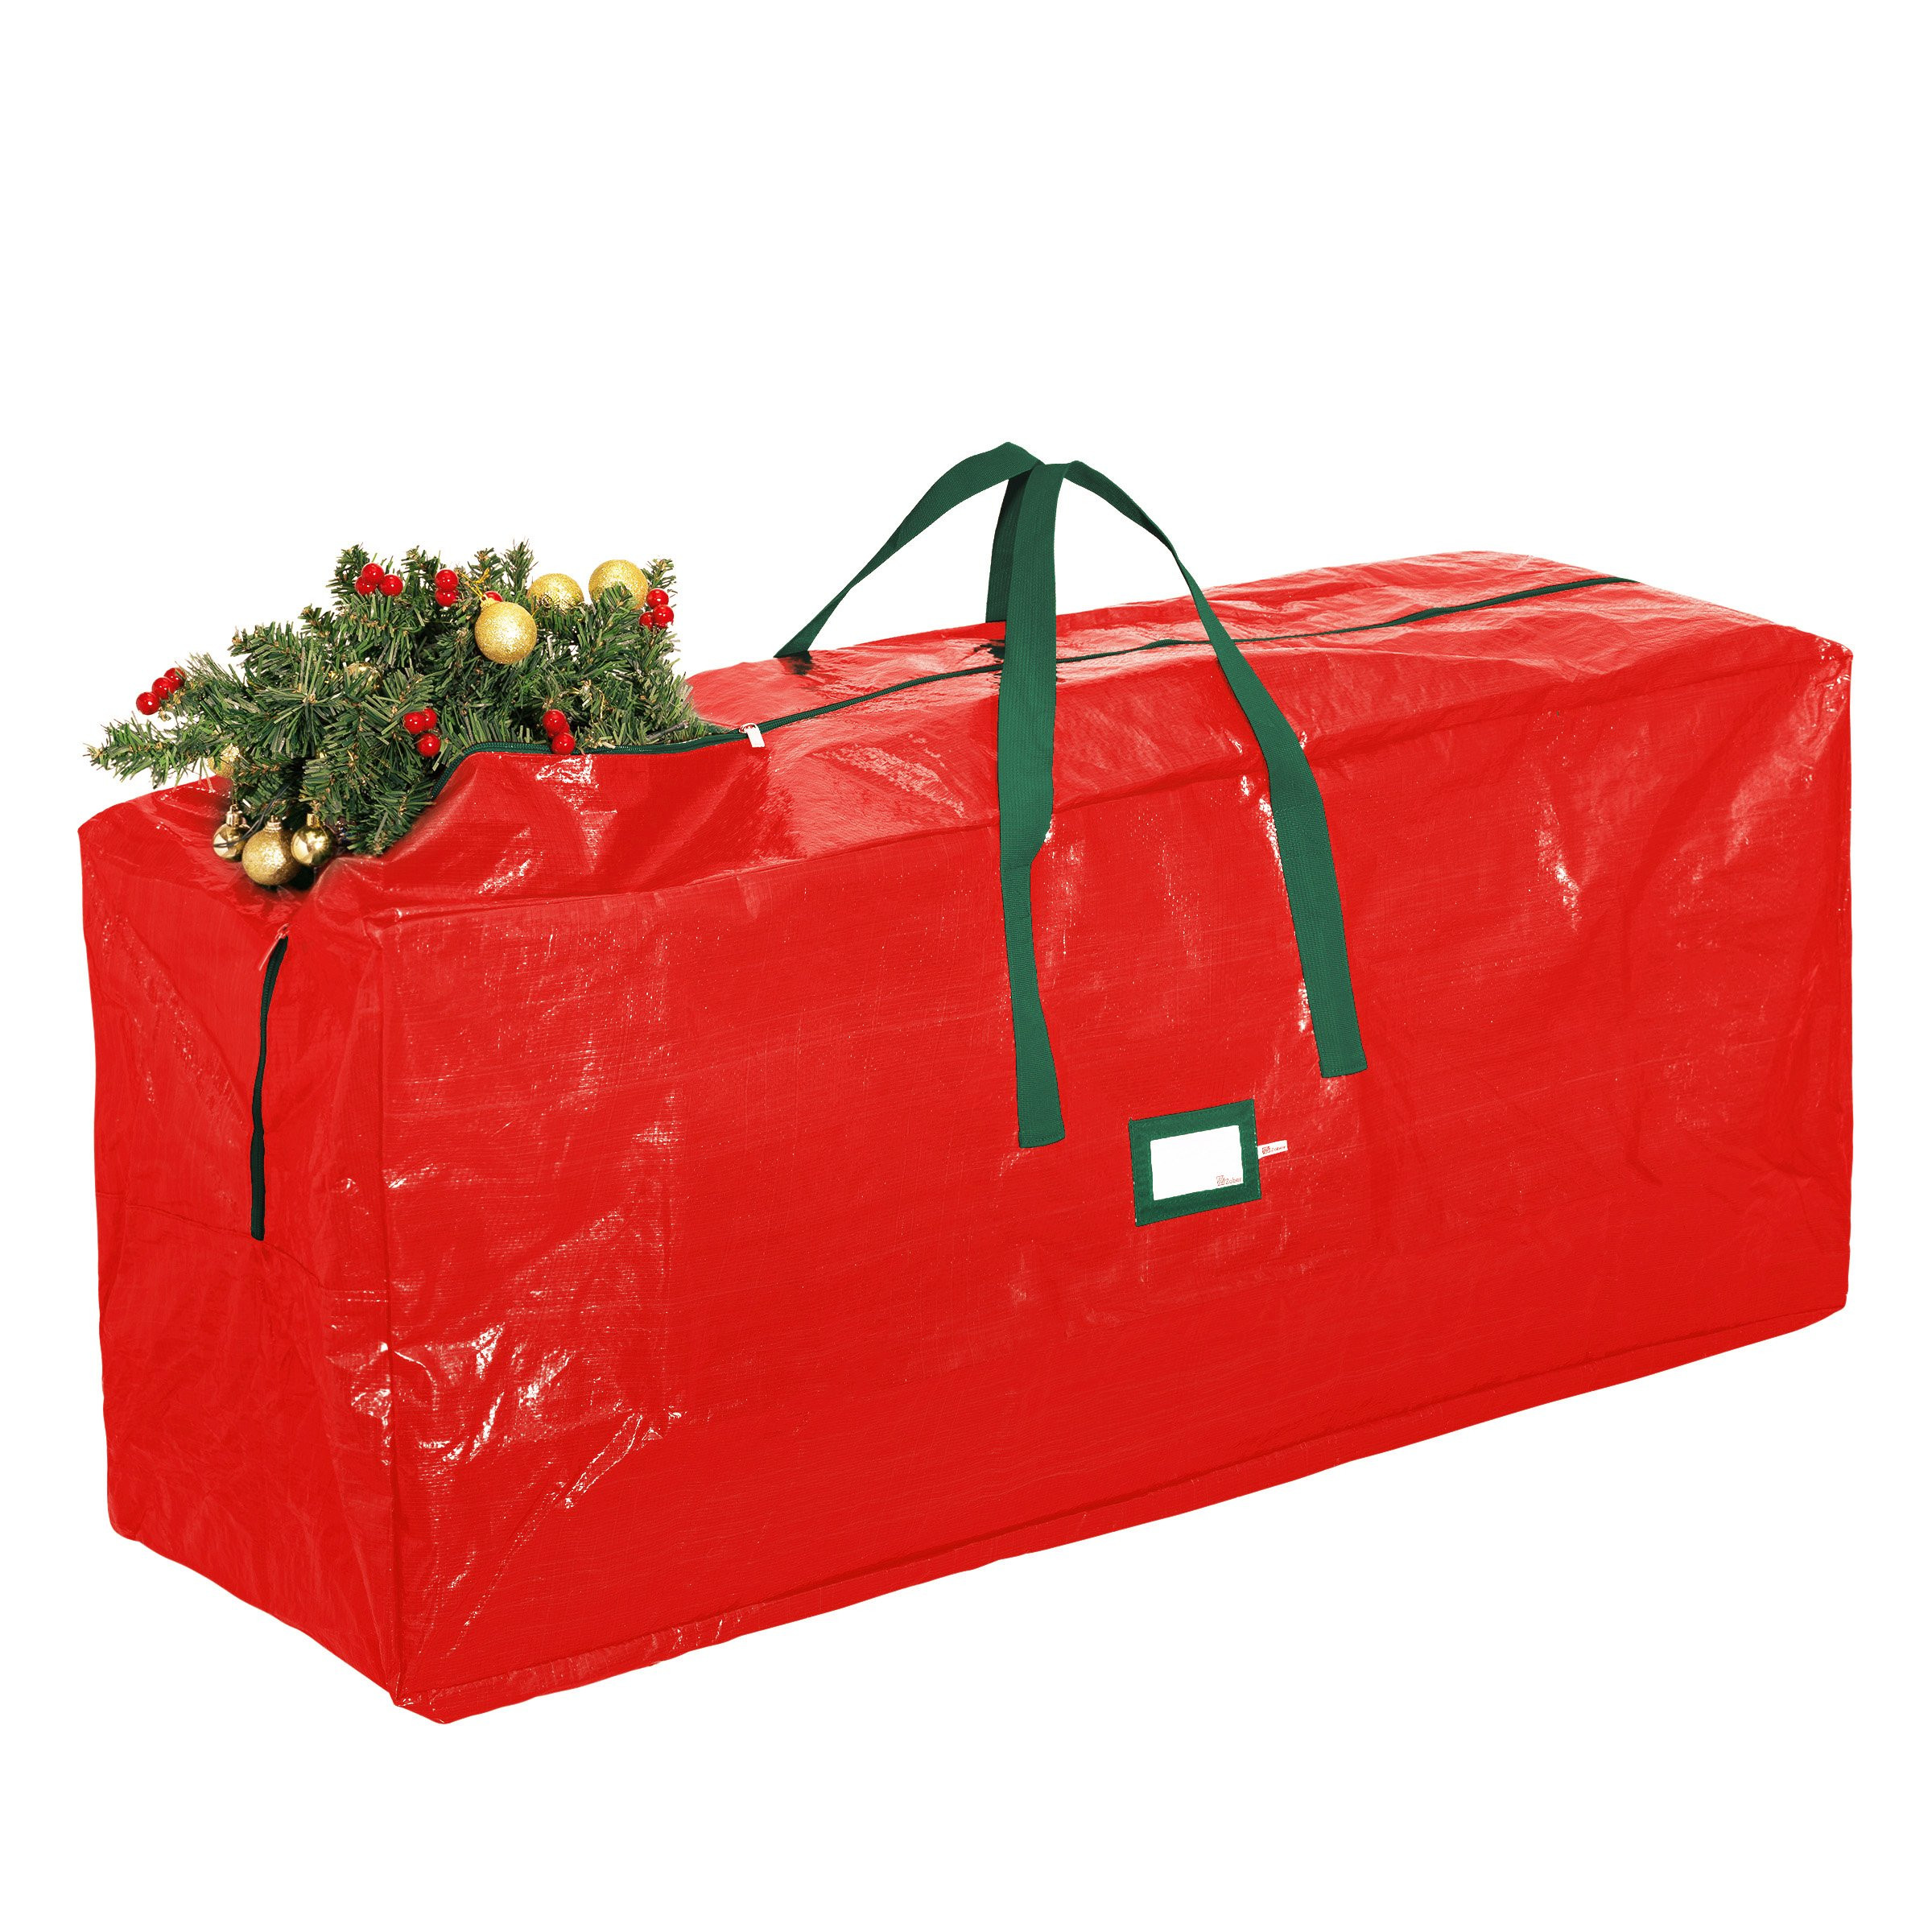 Christmas Tree Storage Bags
 Best Rated in Christmas Tree Storage & Helpful Customer